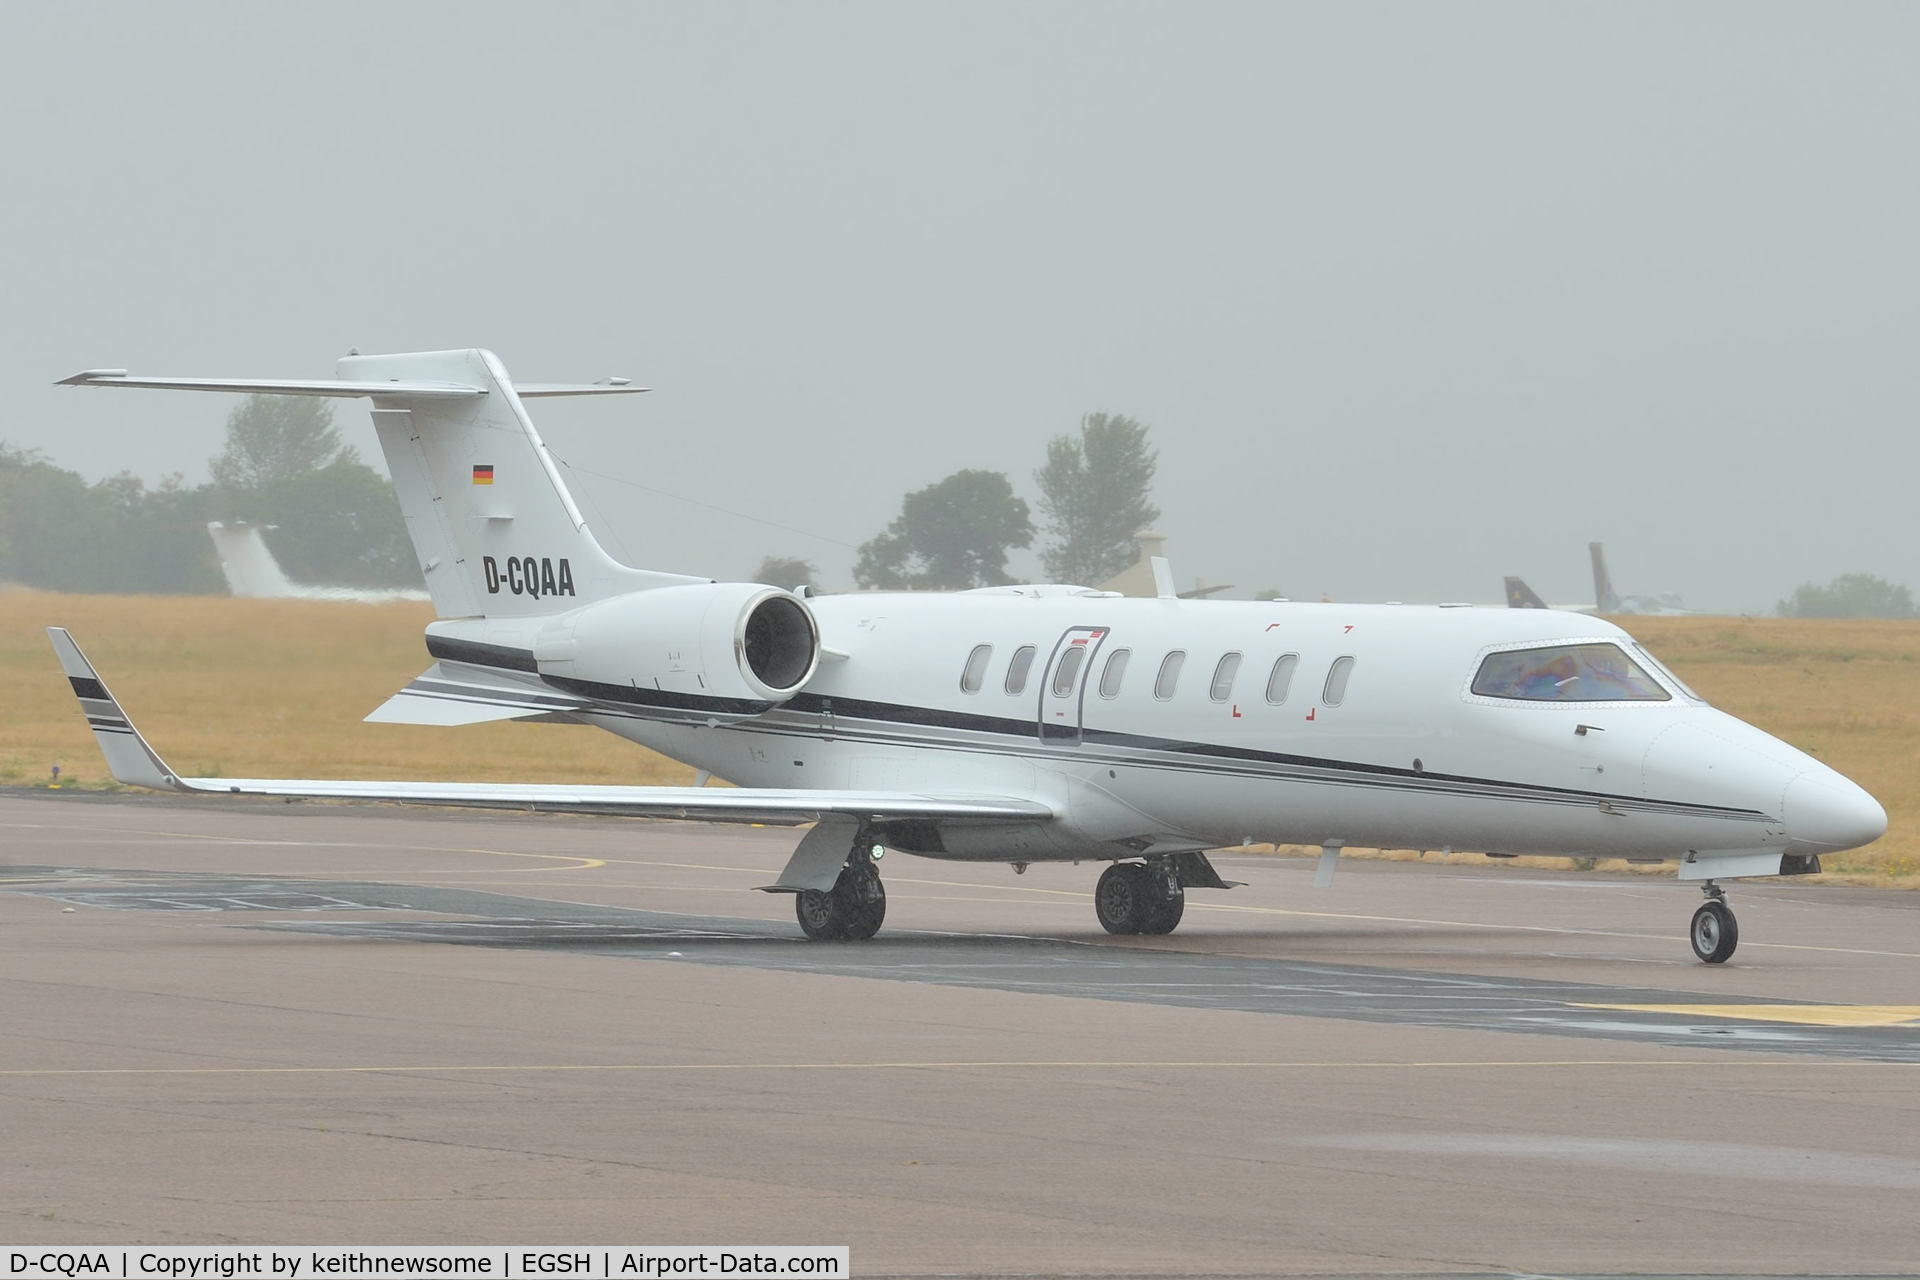 D-CQAA, 2000 Learjet 45 C/N 122, Leaving Norwich for Cologne, Germany.